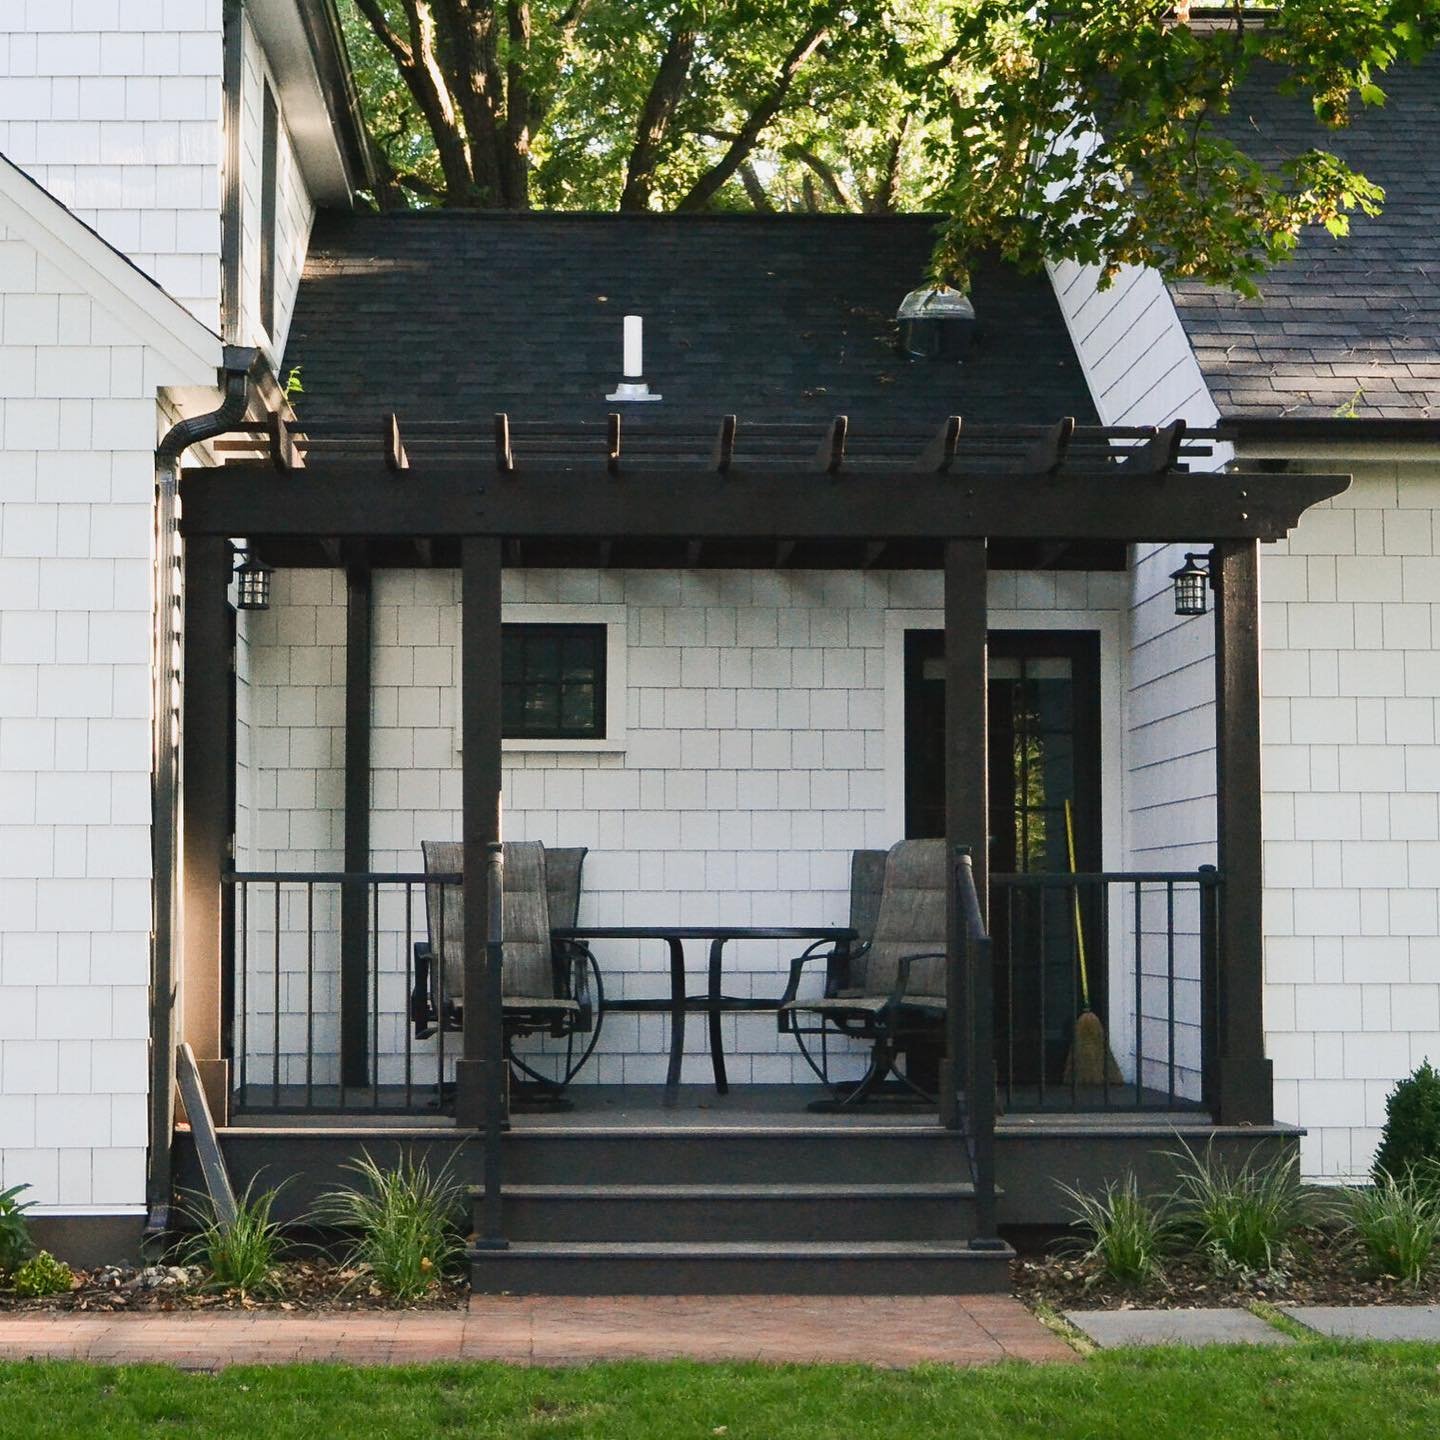 Who doesn&rsquo;t love a charming porch to look out on a yard like this? This Richfield Beauty home renovation begs to be enjoyed, with a porch perfect for sittin&rsquo; and stayin&rsquo; awhile. Just imagine yourself here, shaded by the majestic oak